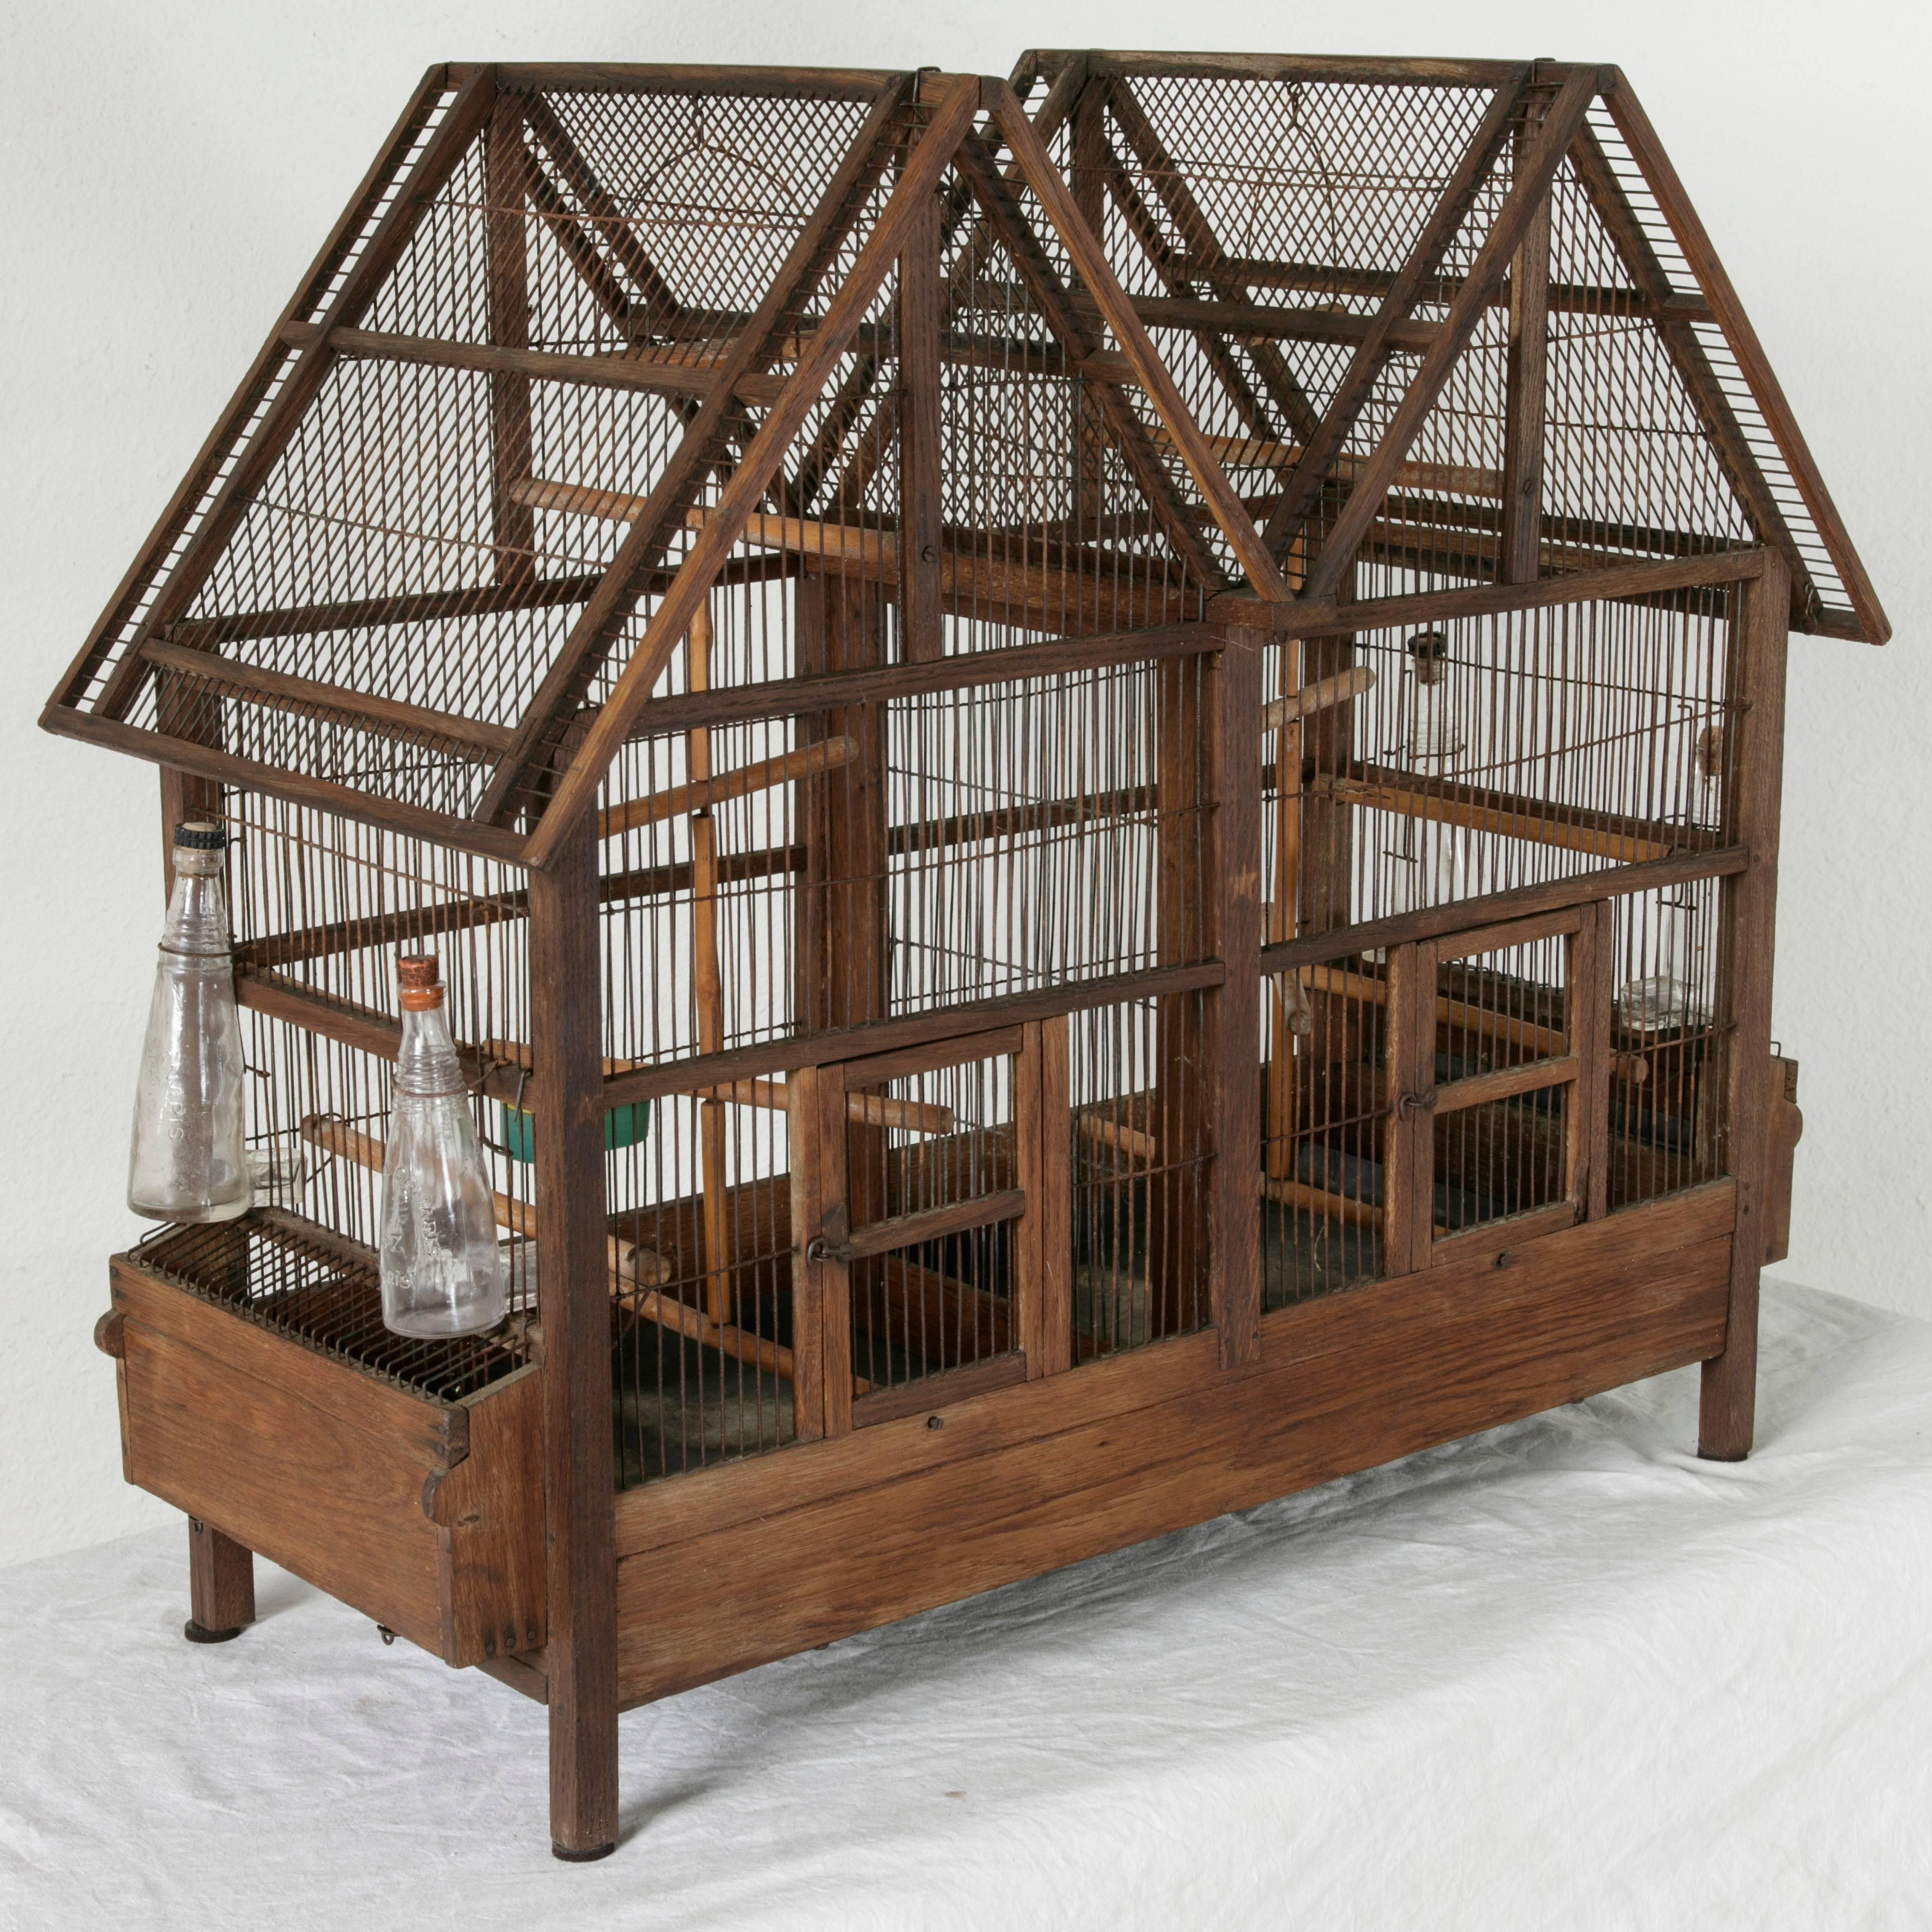 This very large artisan-made wood and wire bird cage takes the form of a double gabled house and features a removable zinc bottom and twelve different perches. With two compartments that can be joined by removing the central wall, each side has its